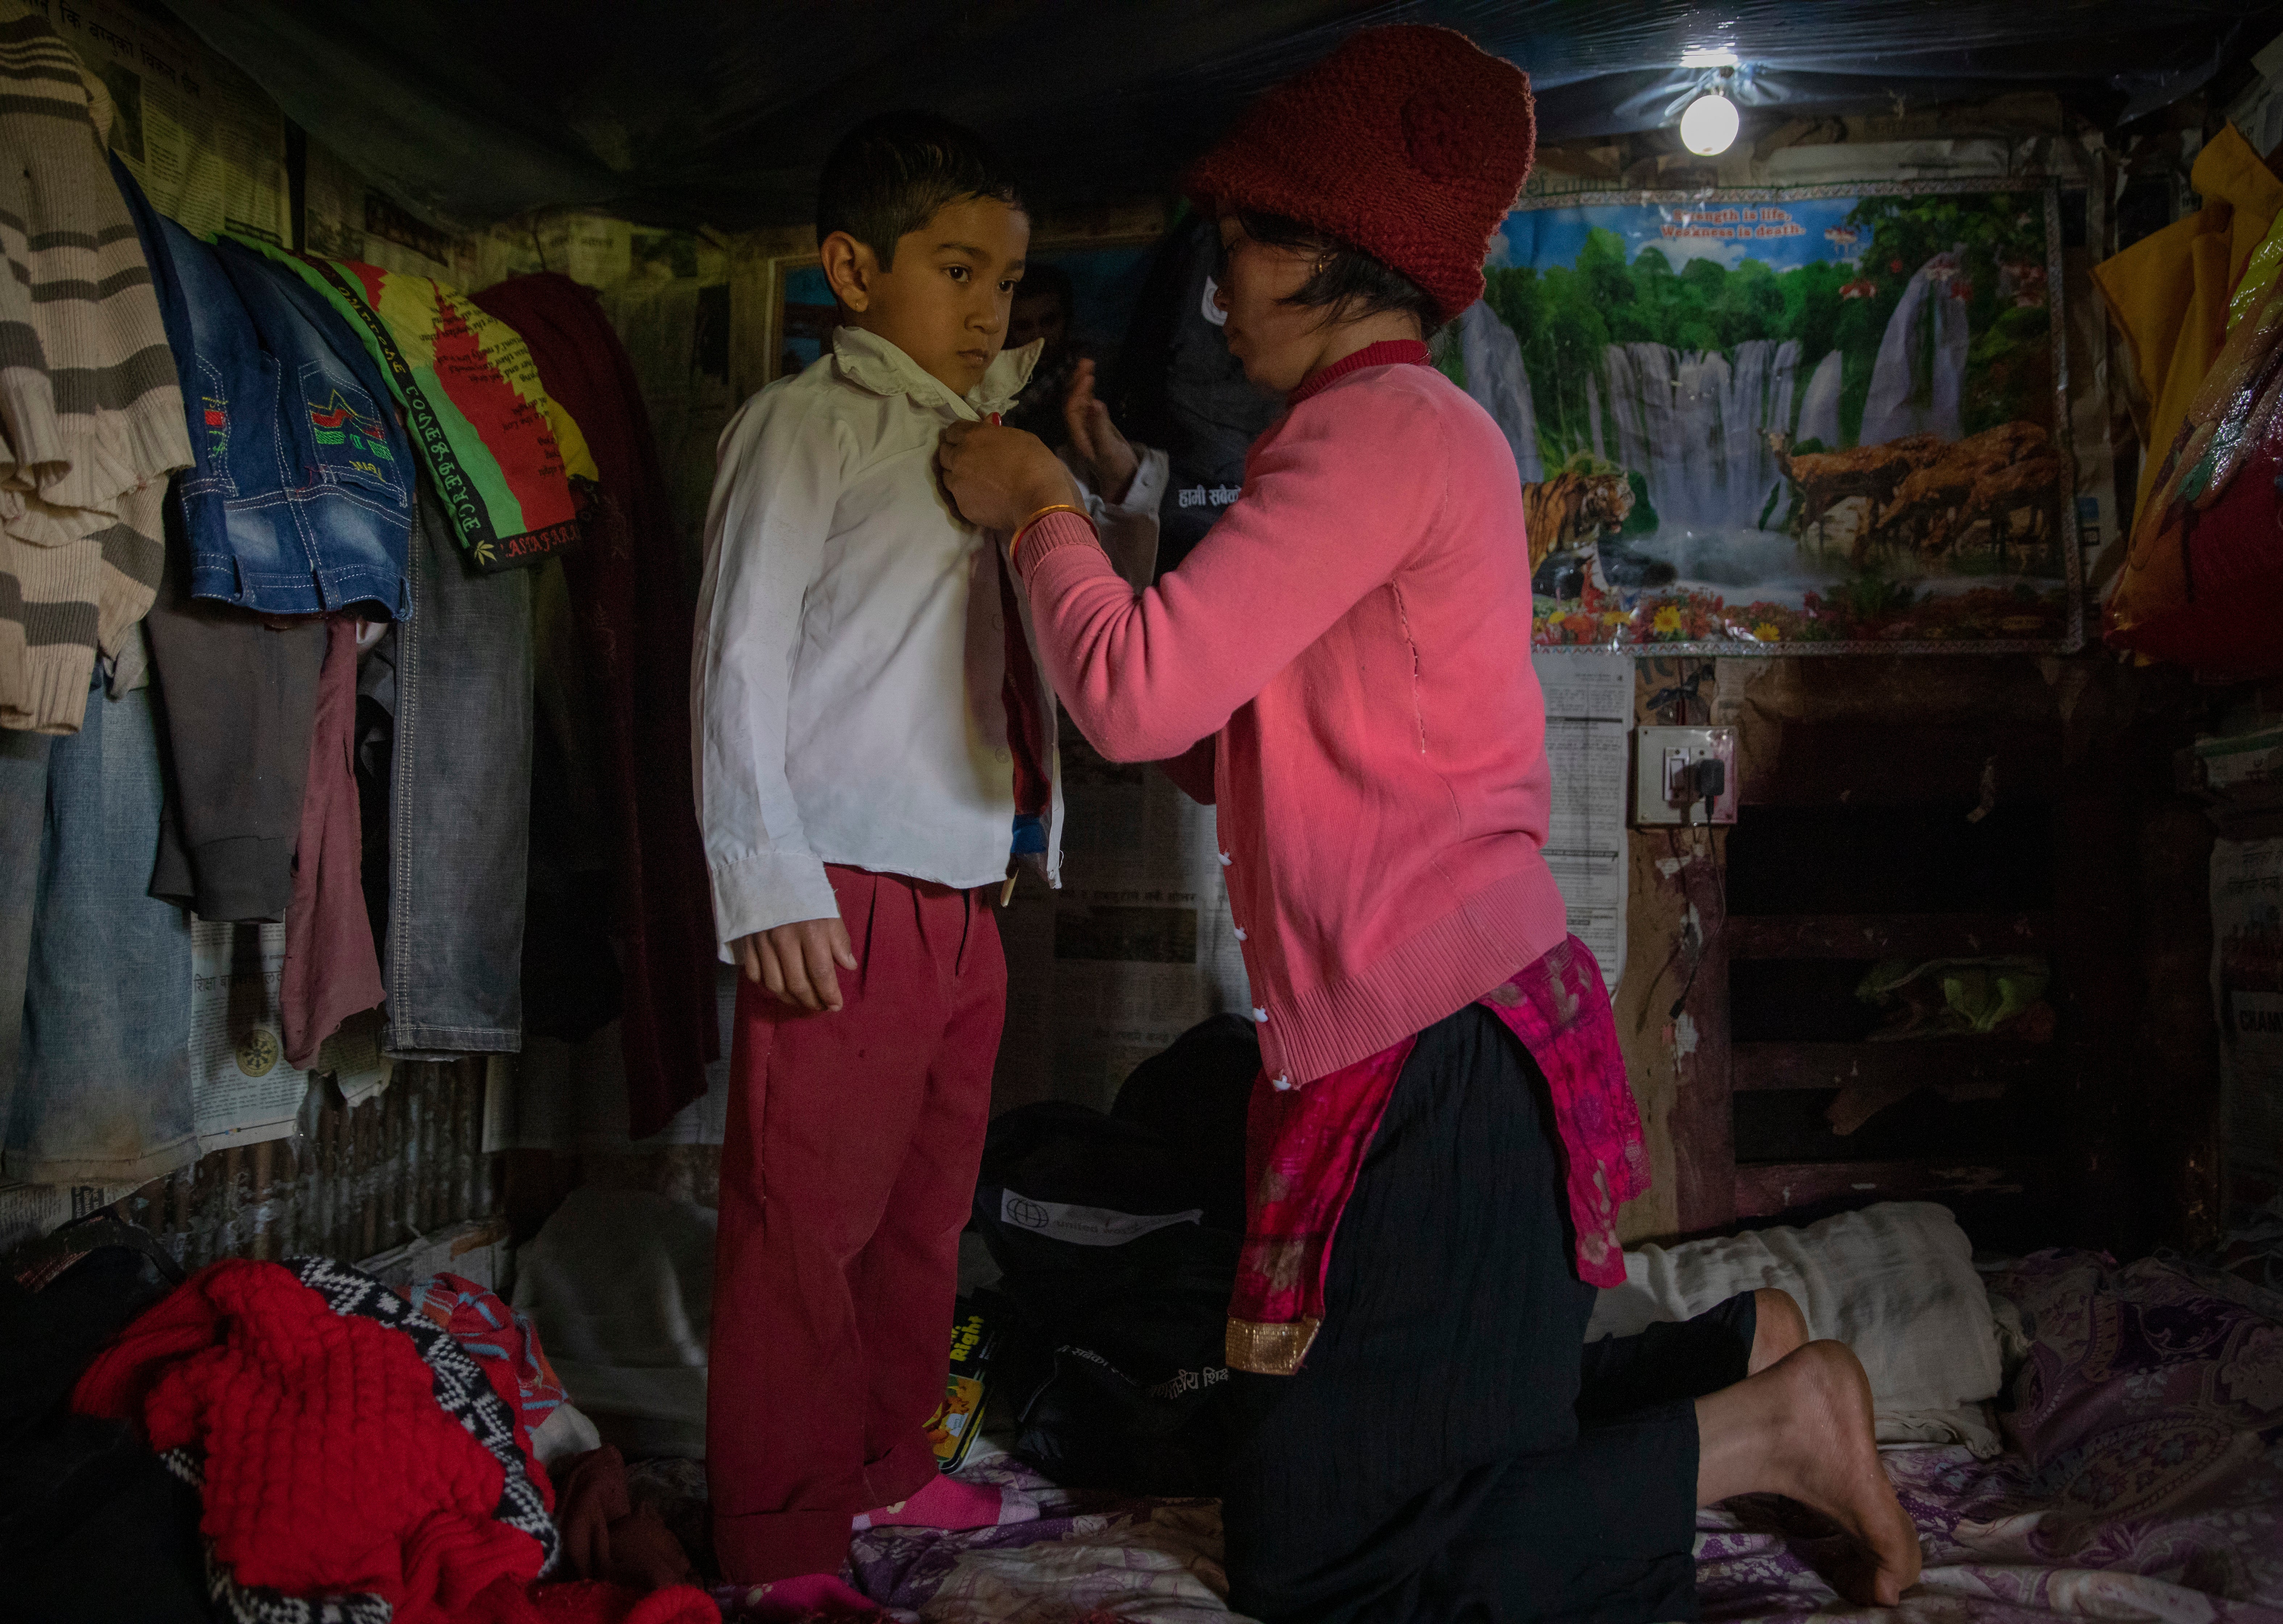 Anjana Poudel, 25, helps her son Amir, 6, get ready for school. She says: “ We believe through education he can have a future away from simply living without dreams. We are investing in him in the hope that a life out of poverty can become real.”